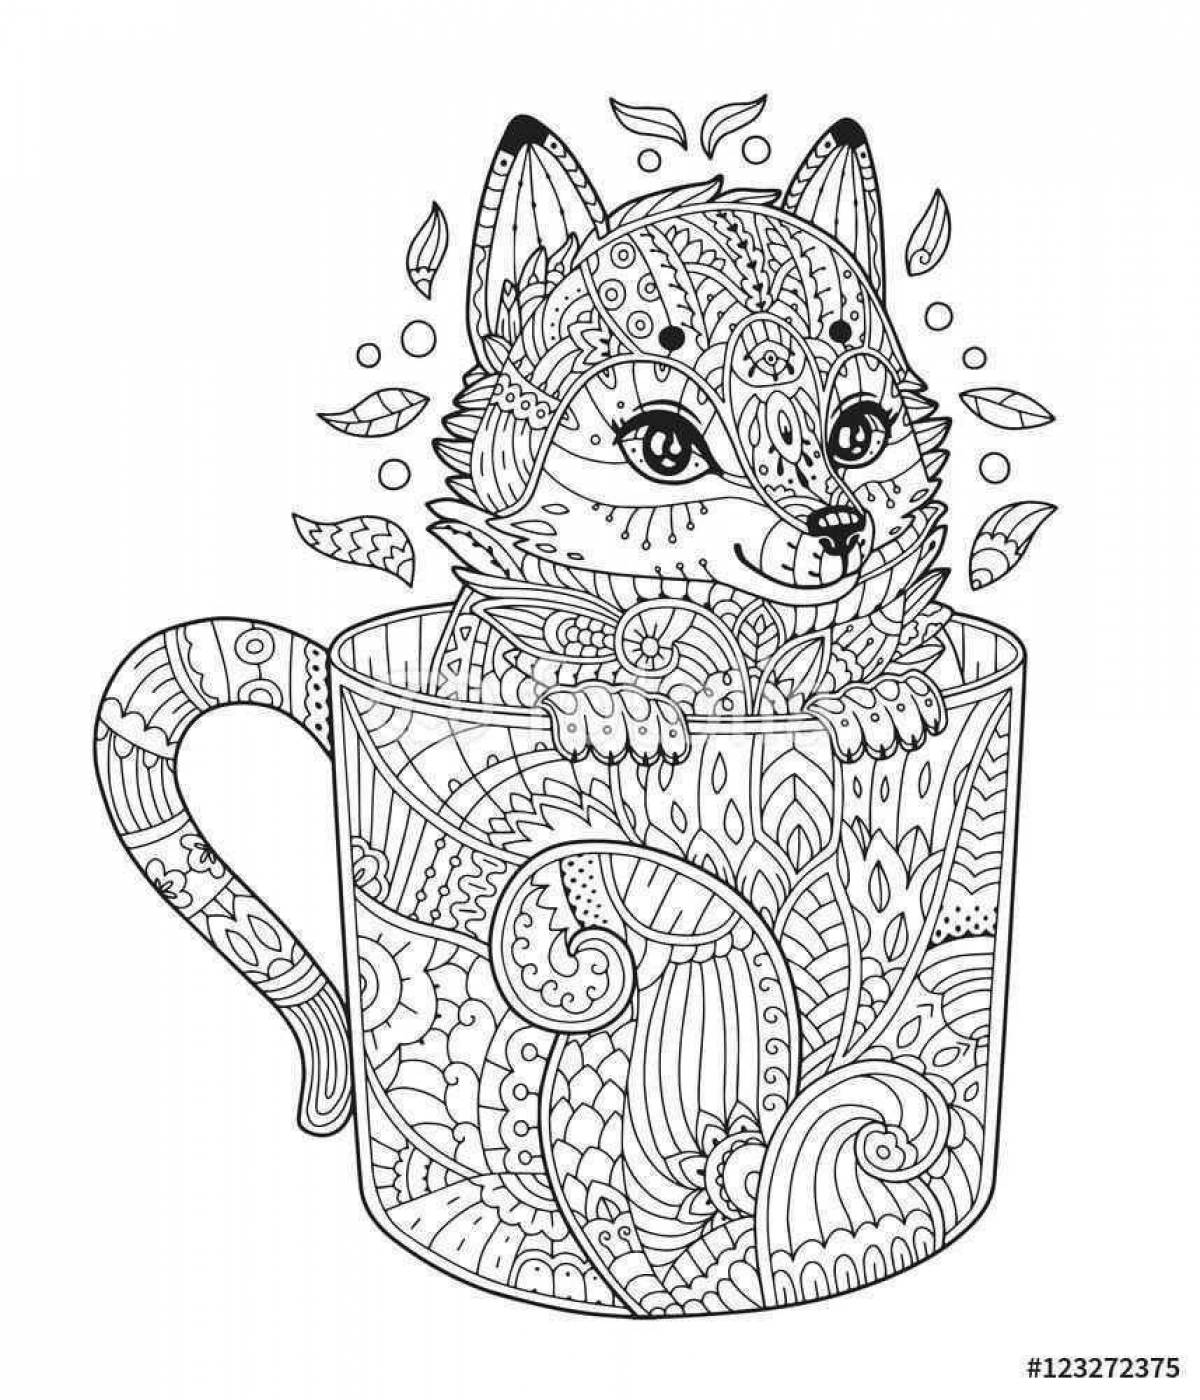 Coloring page fluffy cat in a cup